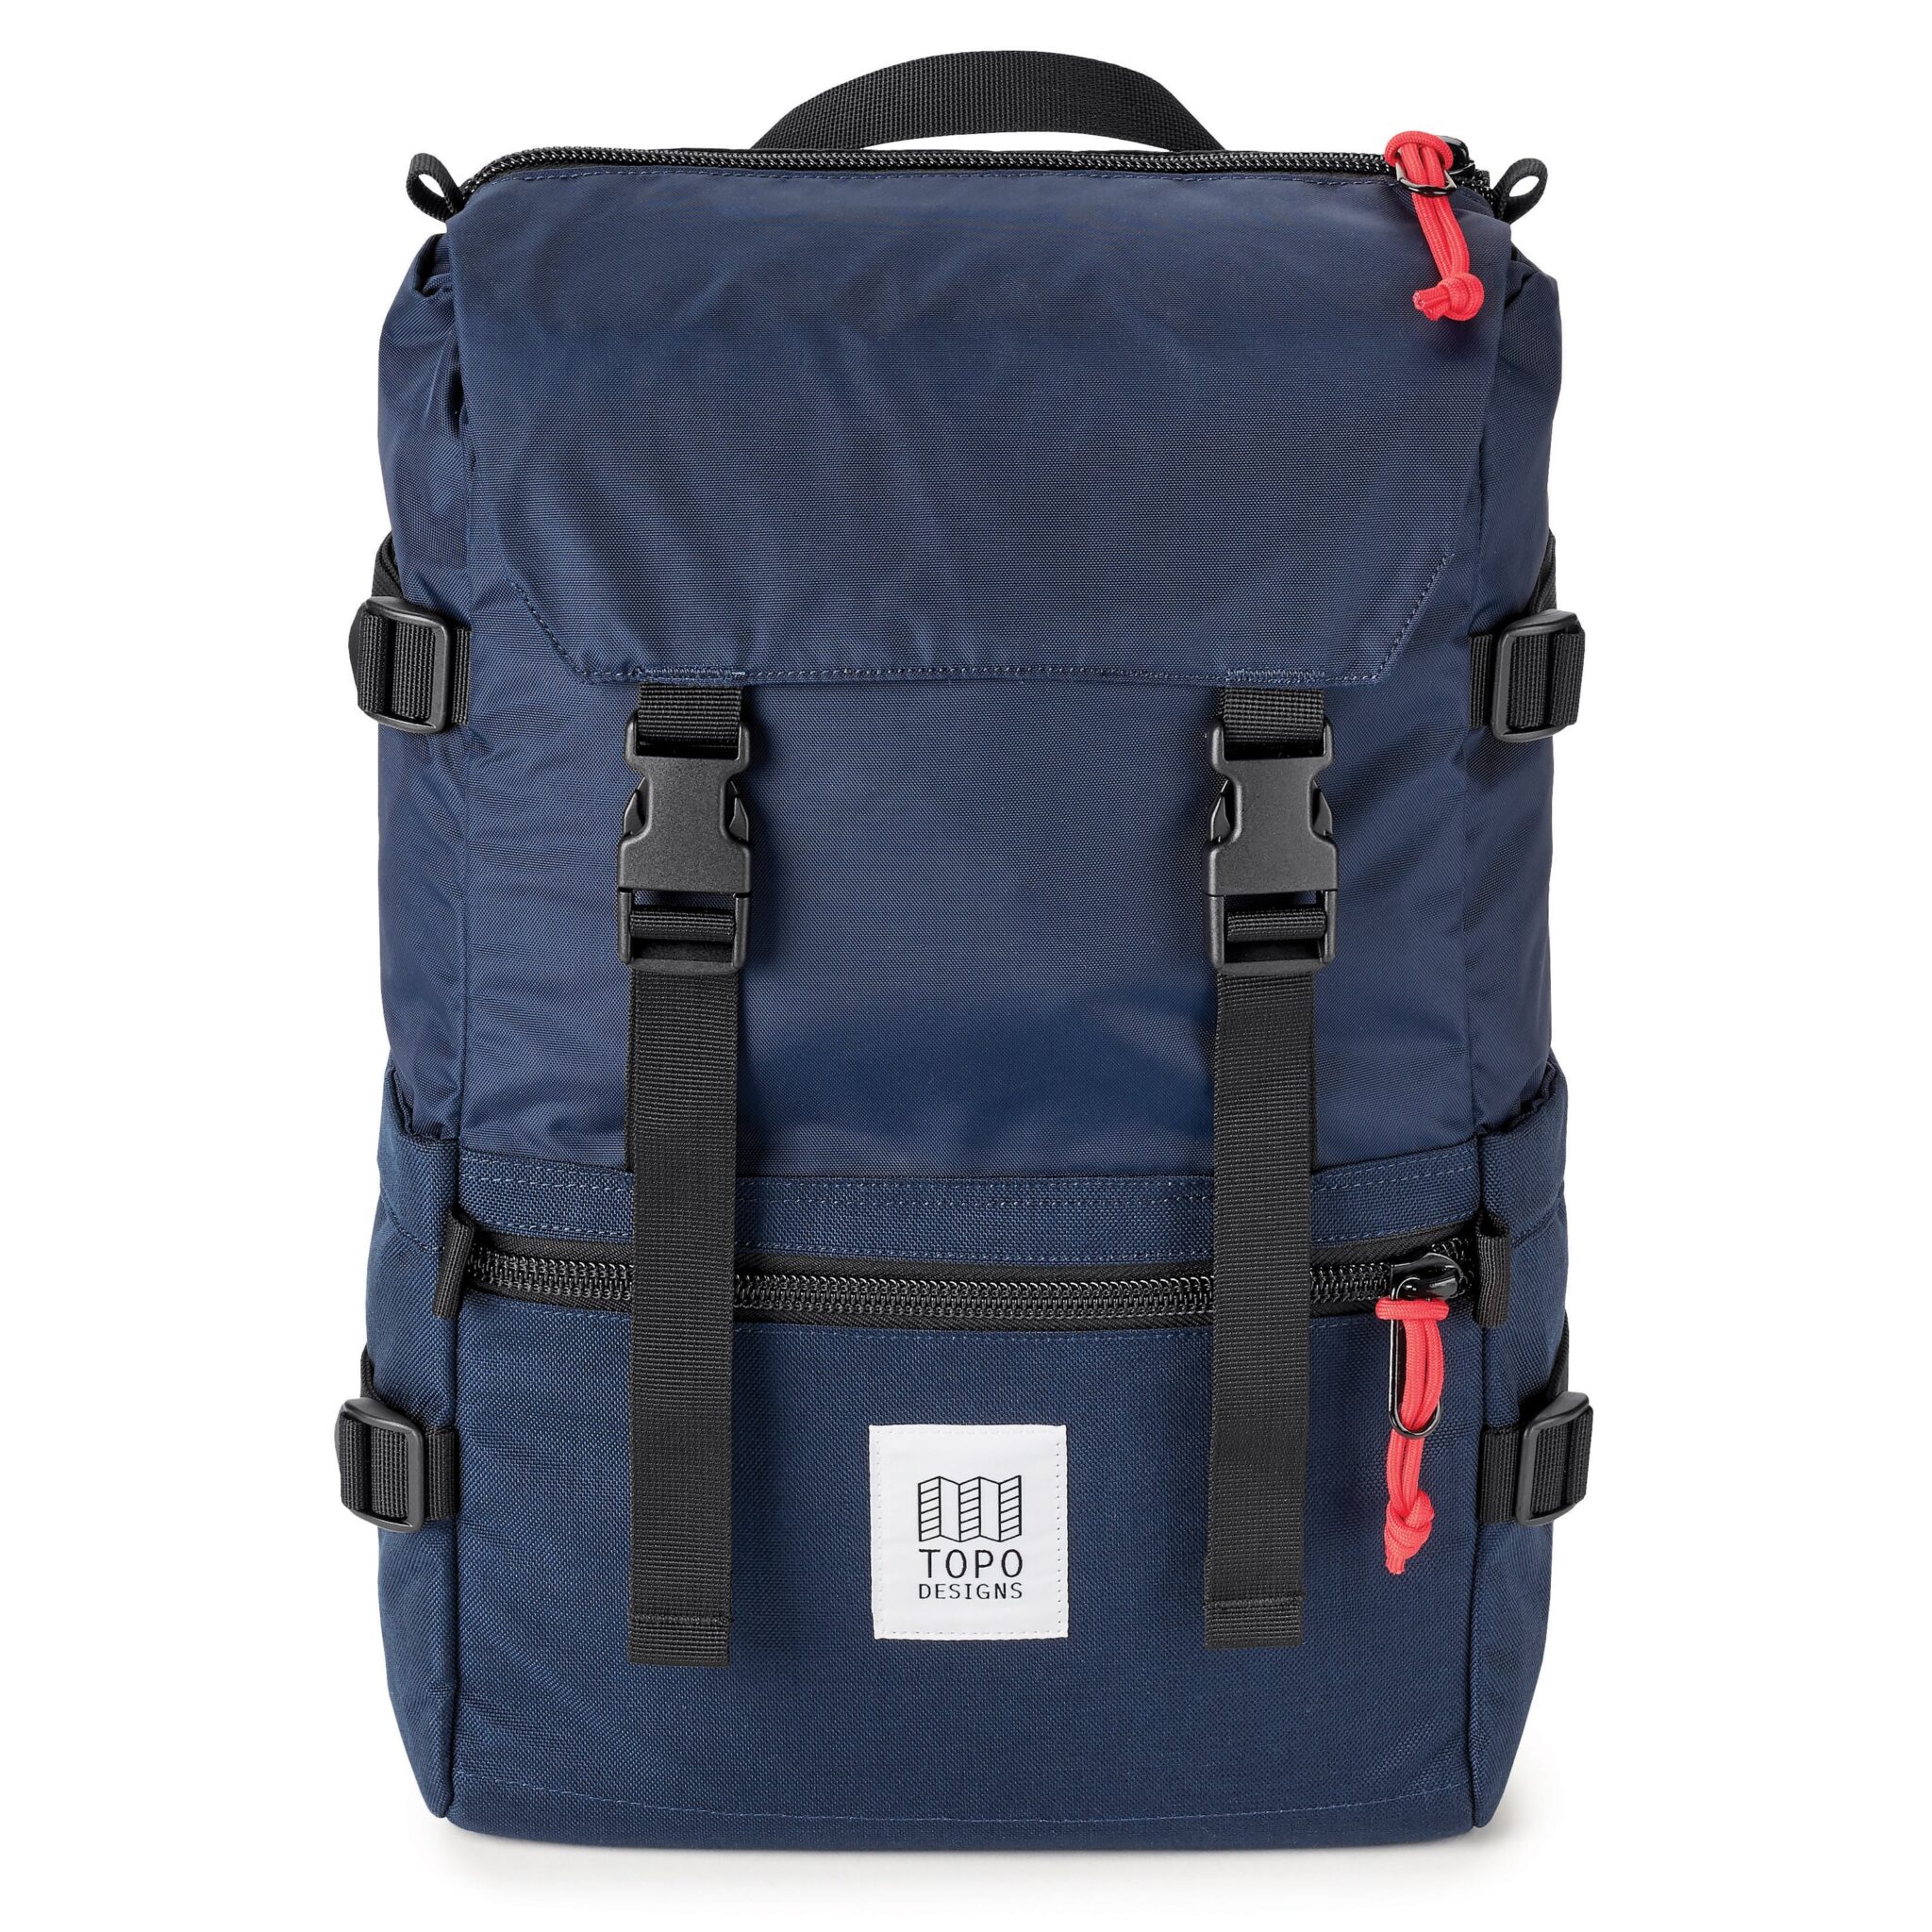 A picture of a blue backpack